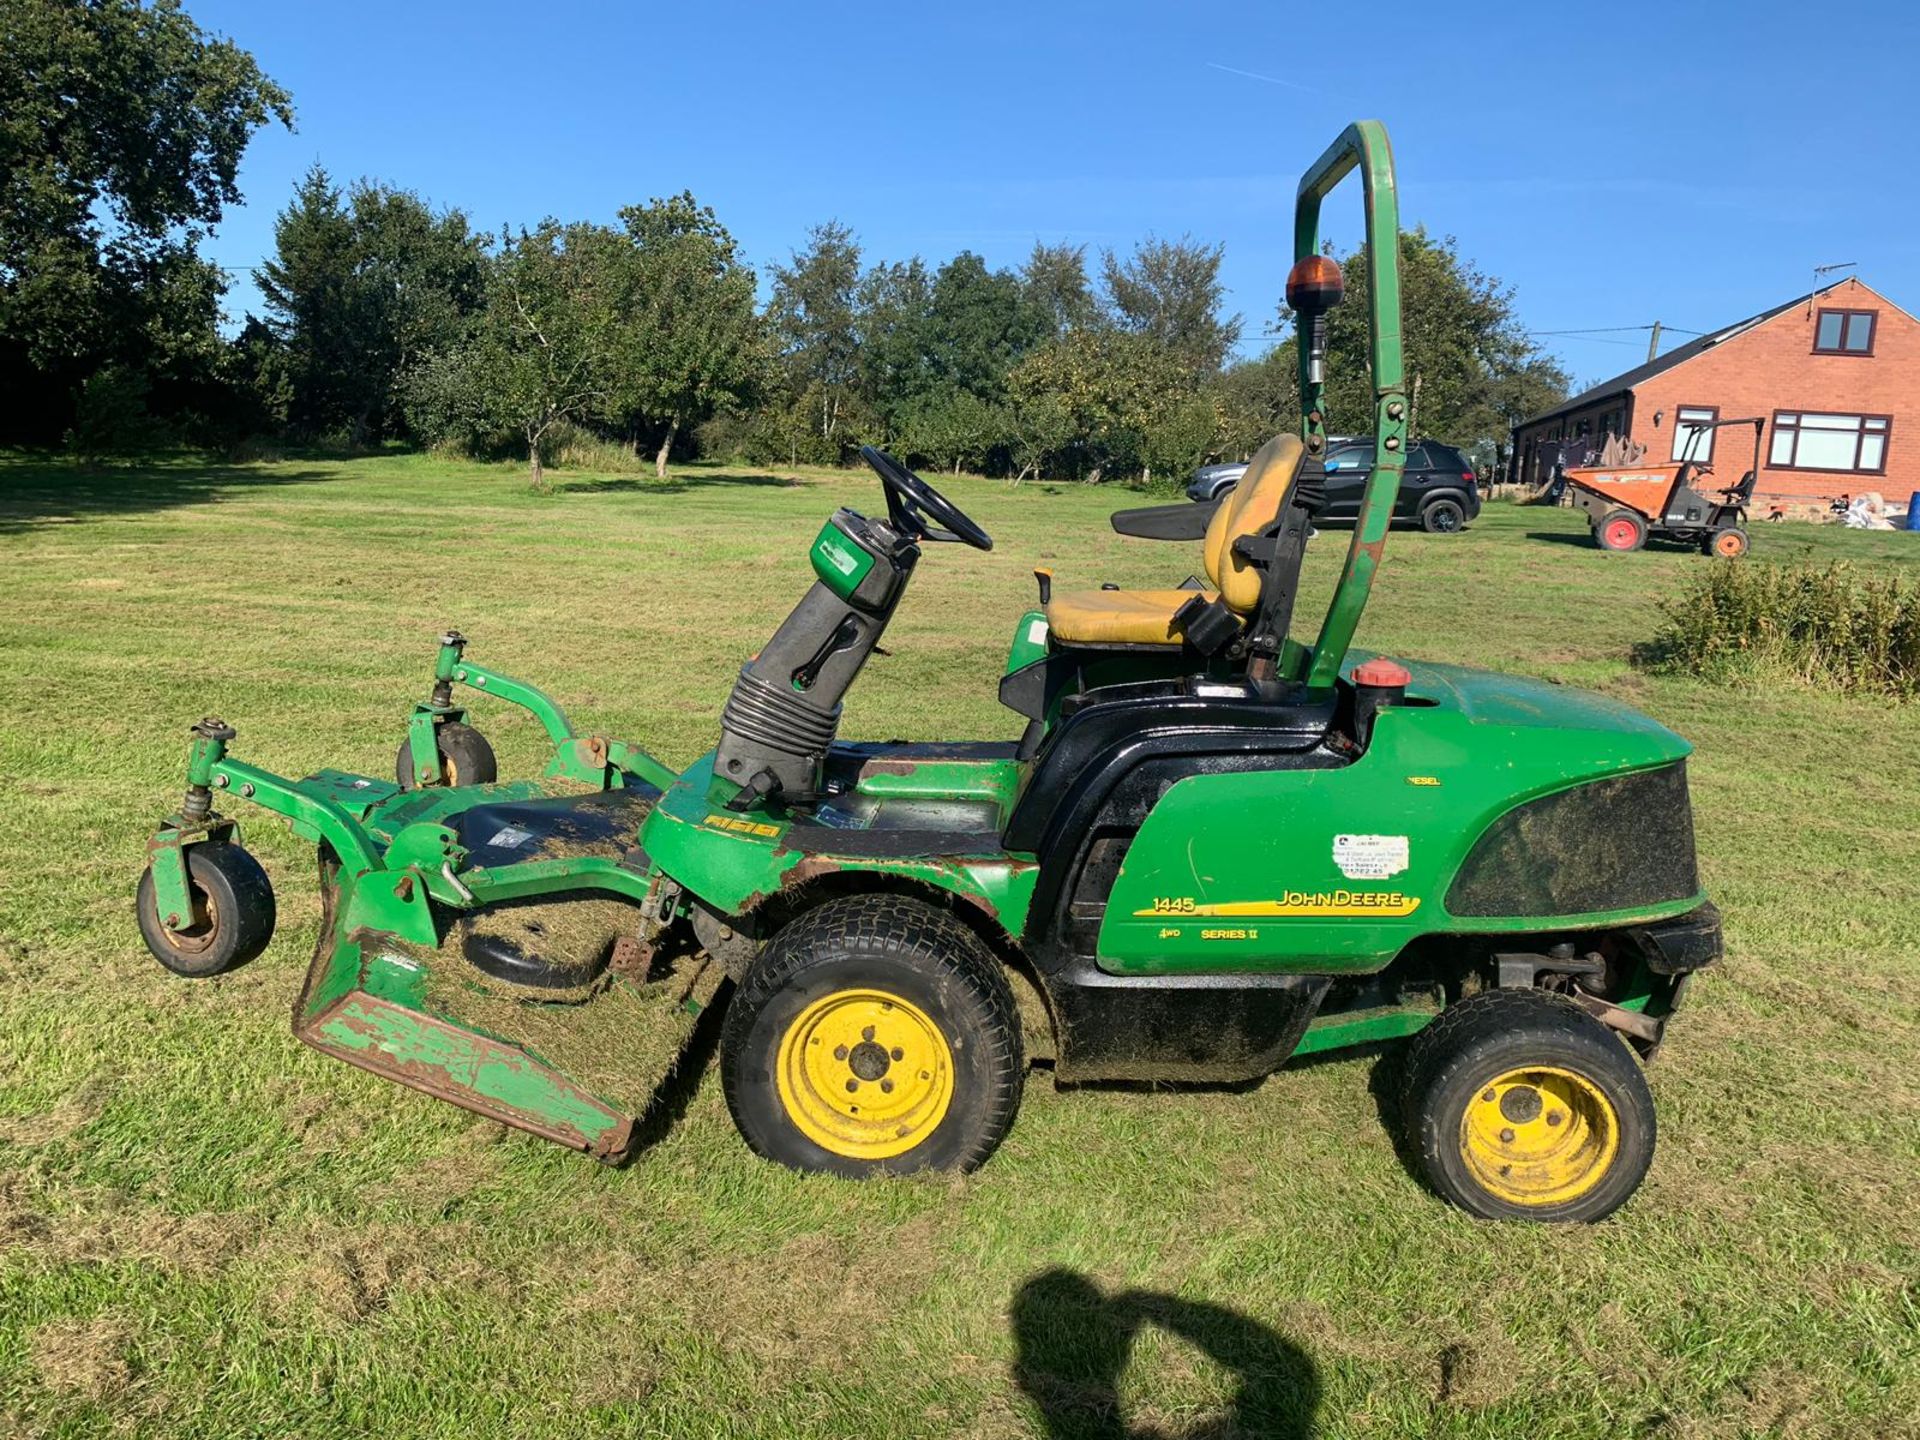 JOHN DEERE 1445 SERIES II 4WD RIDE ON DIESEL LAWN MOWER C/W OUT-FRONT ROTARY CUTTING DECK *PLUS VAT* - Image 9 of 14